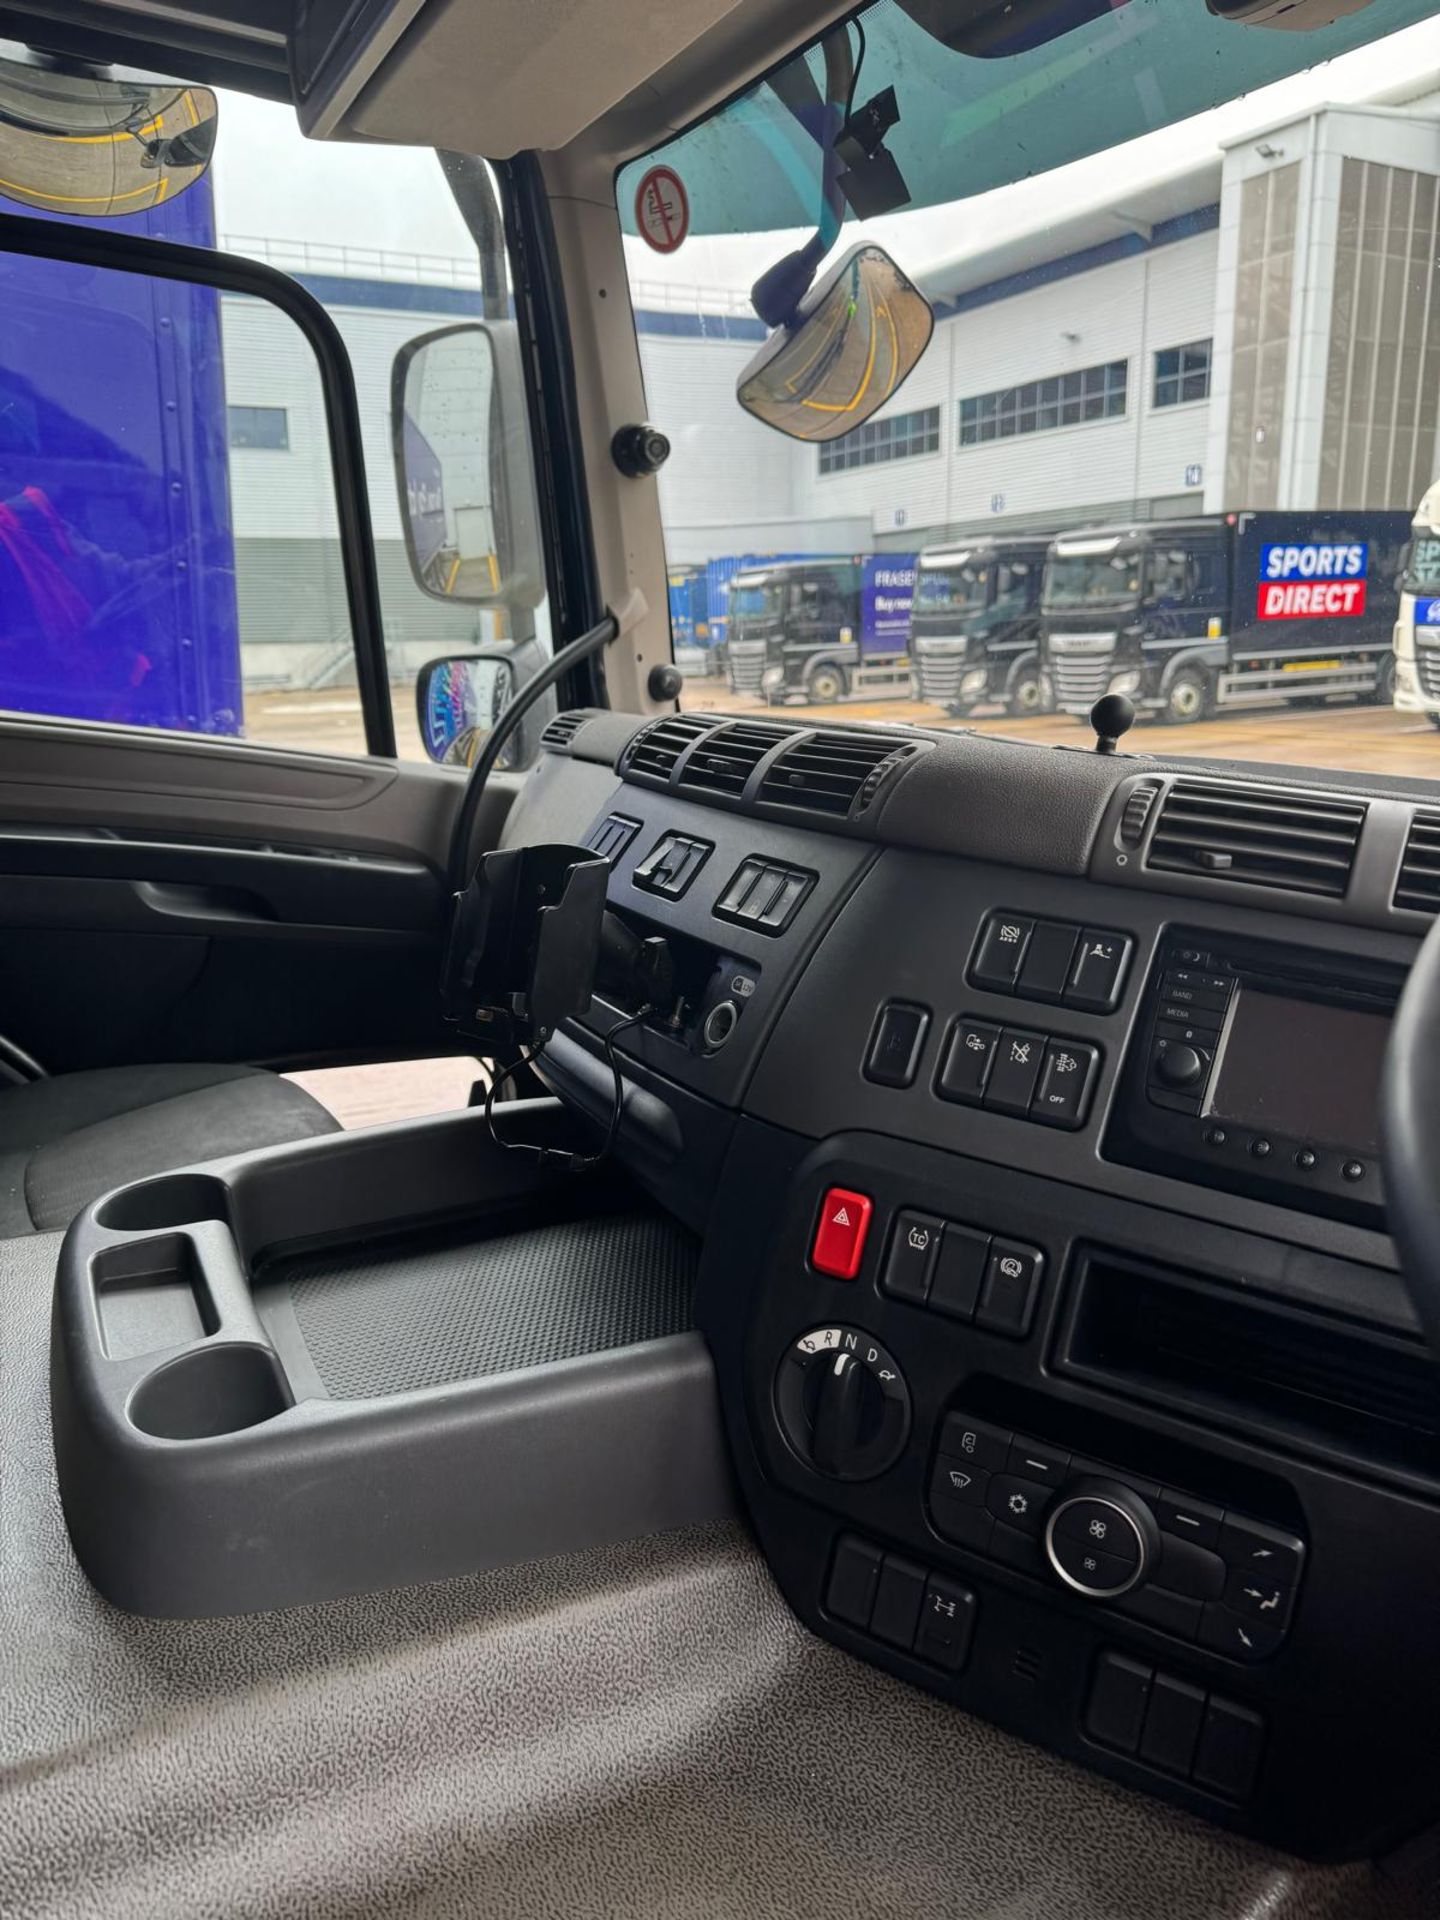 2019, DAF CF 260 FA (Ex-Fleet Owned & Maintained) - FN69 AXH (18 Ton Rigid Truck with Tail Lift) - Image 10 of 22